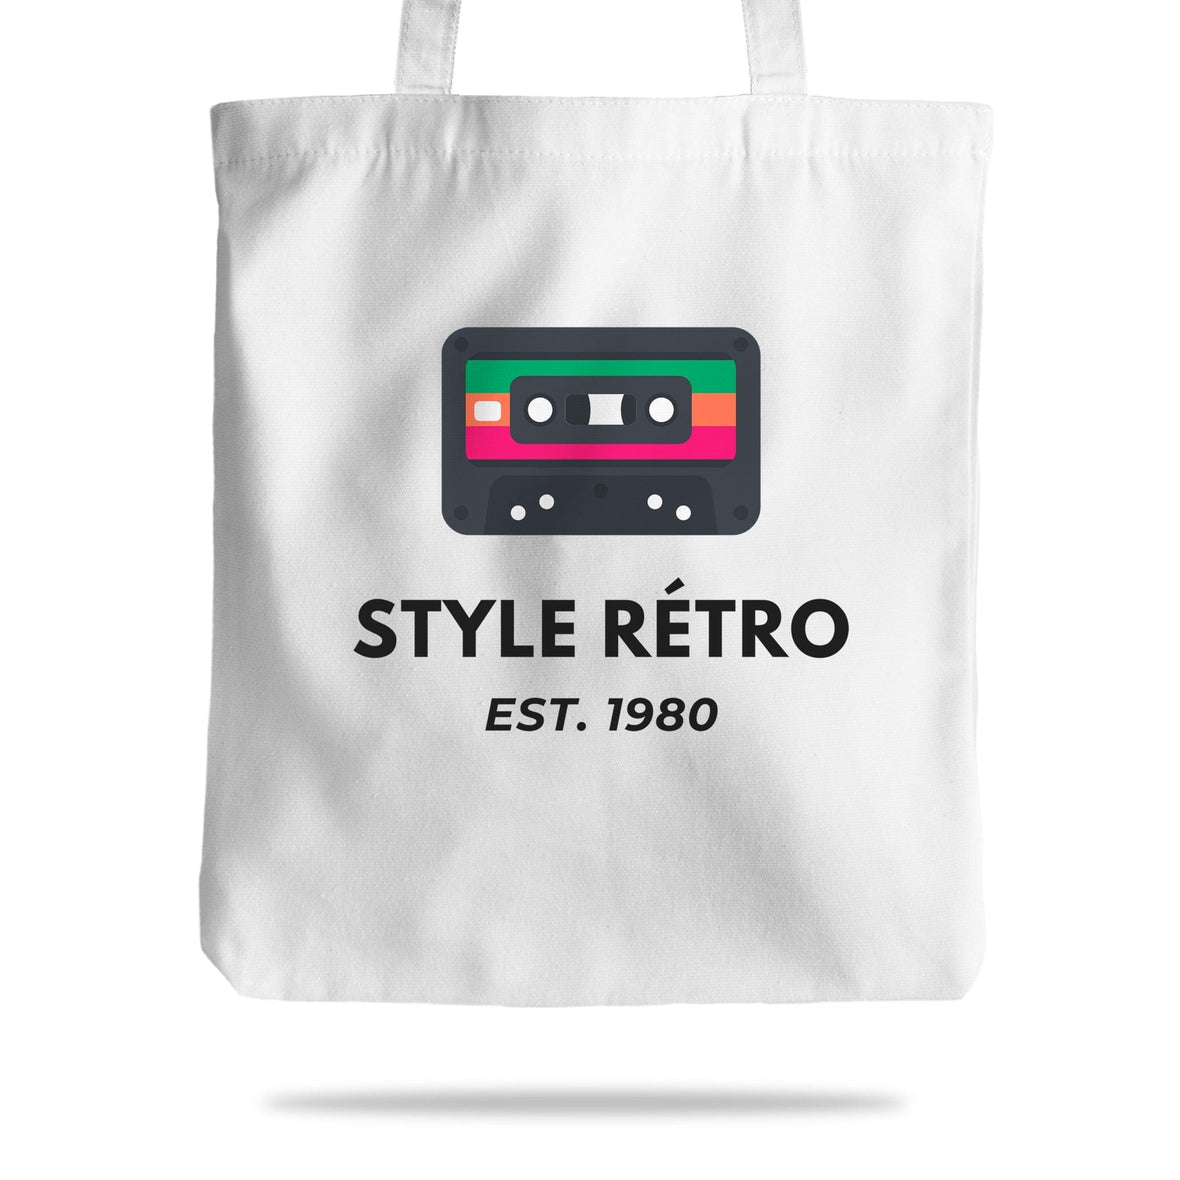 Cassette tapes tote bag